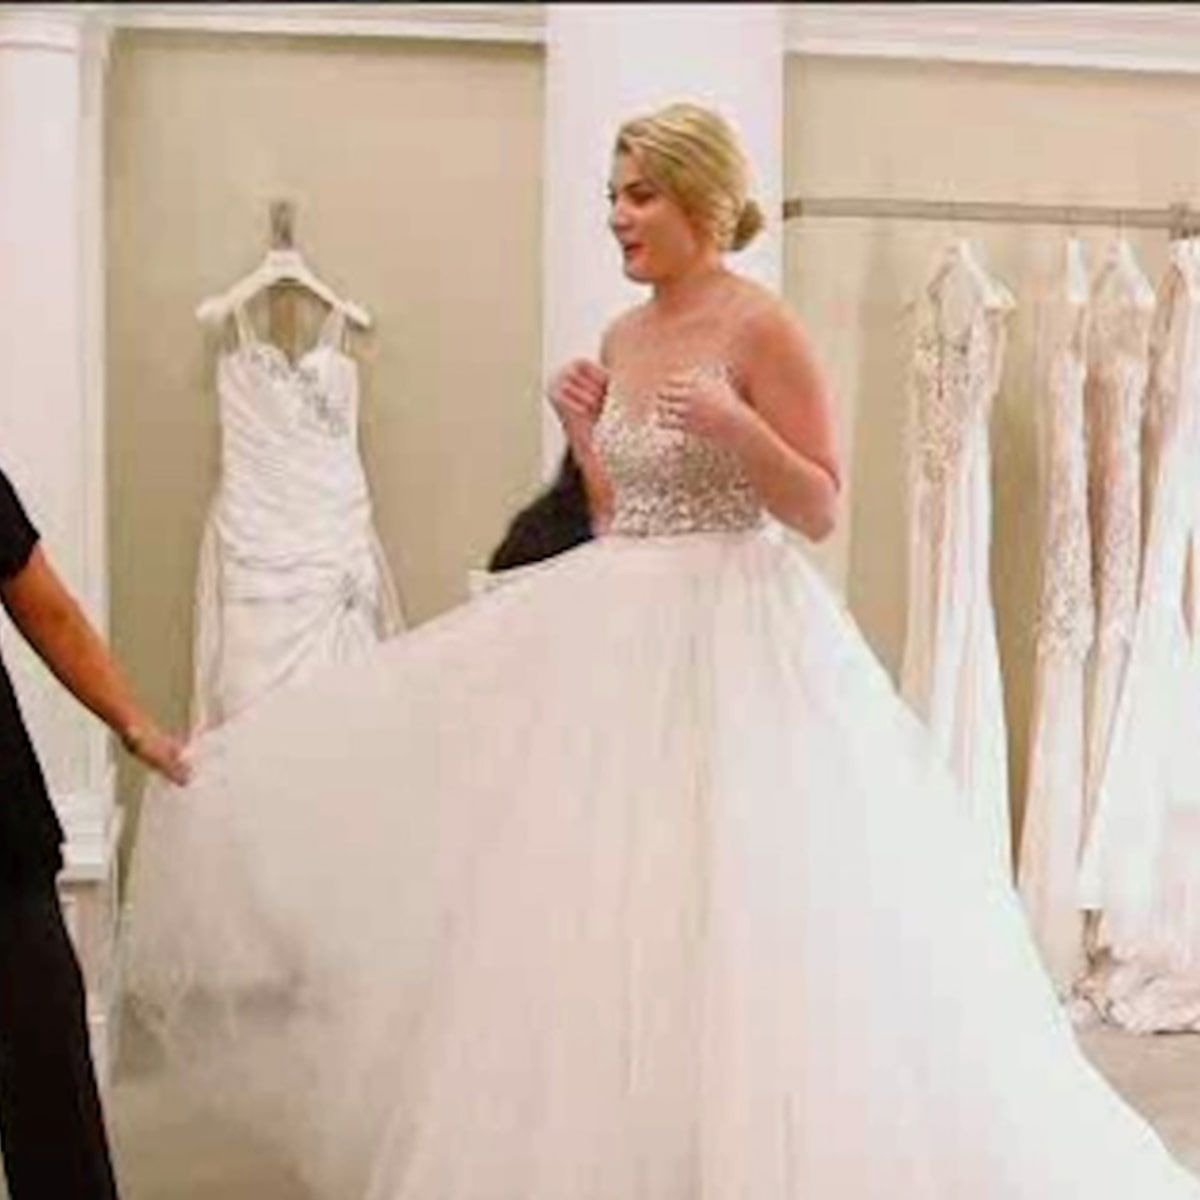 Bride Alexandra trying on a gown for Say Yes To The Dress